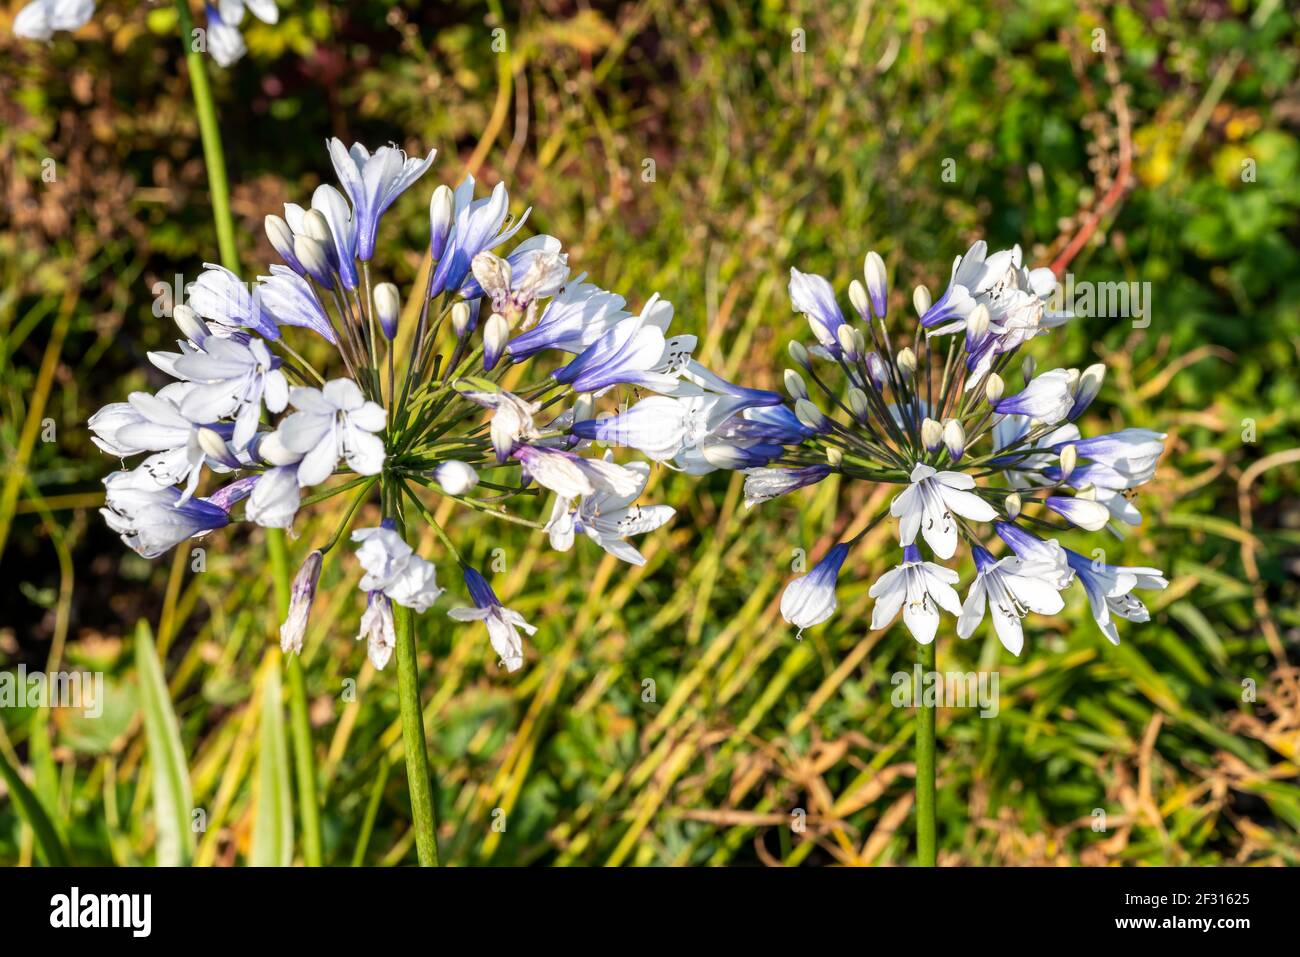 Agapanthus africanus 'Twister' a summer flowering plant with blue white springtime flower commonly known as African lily, stock photo image Stock Photo